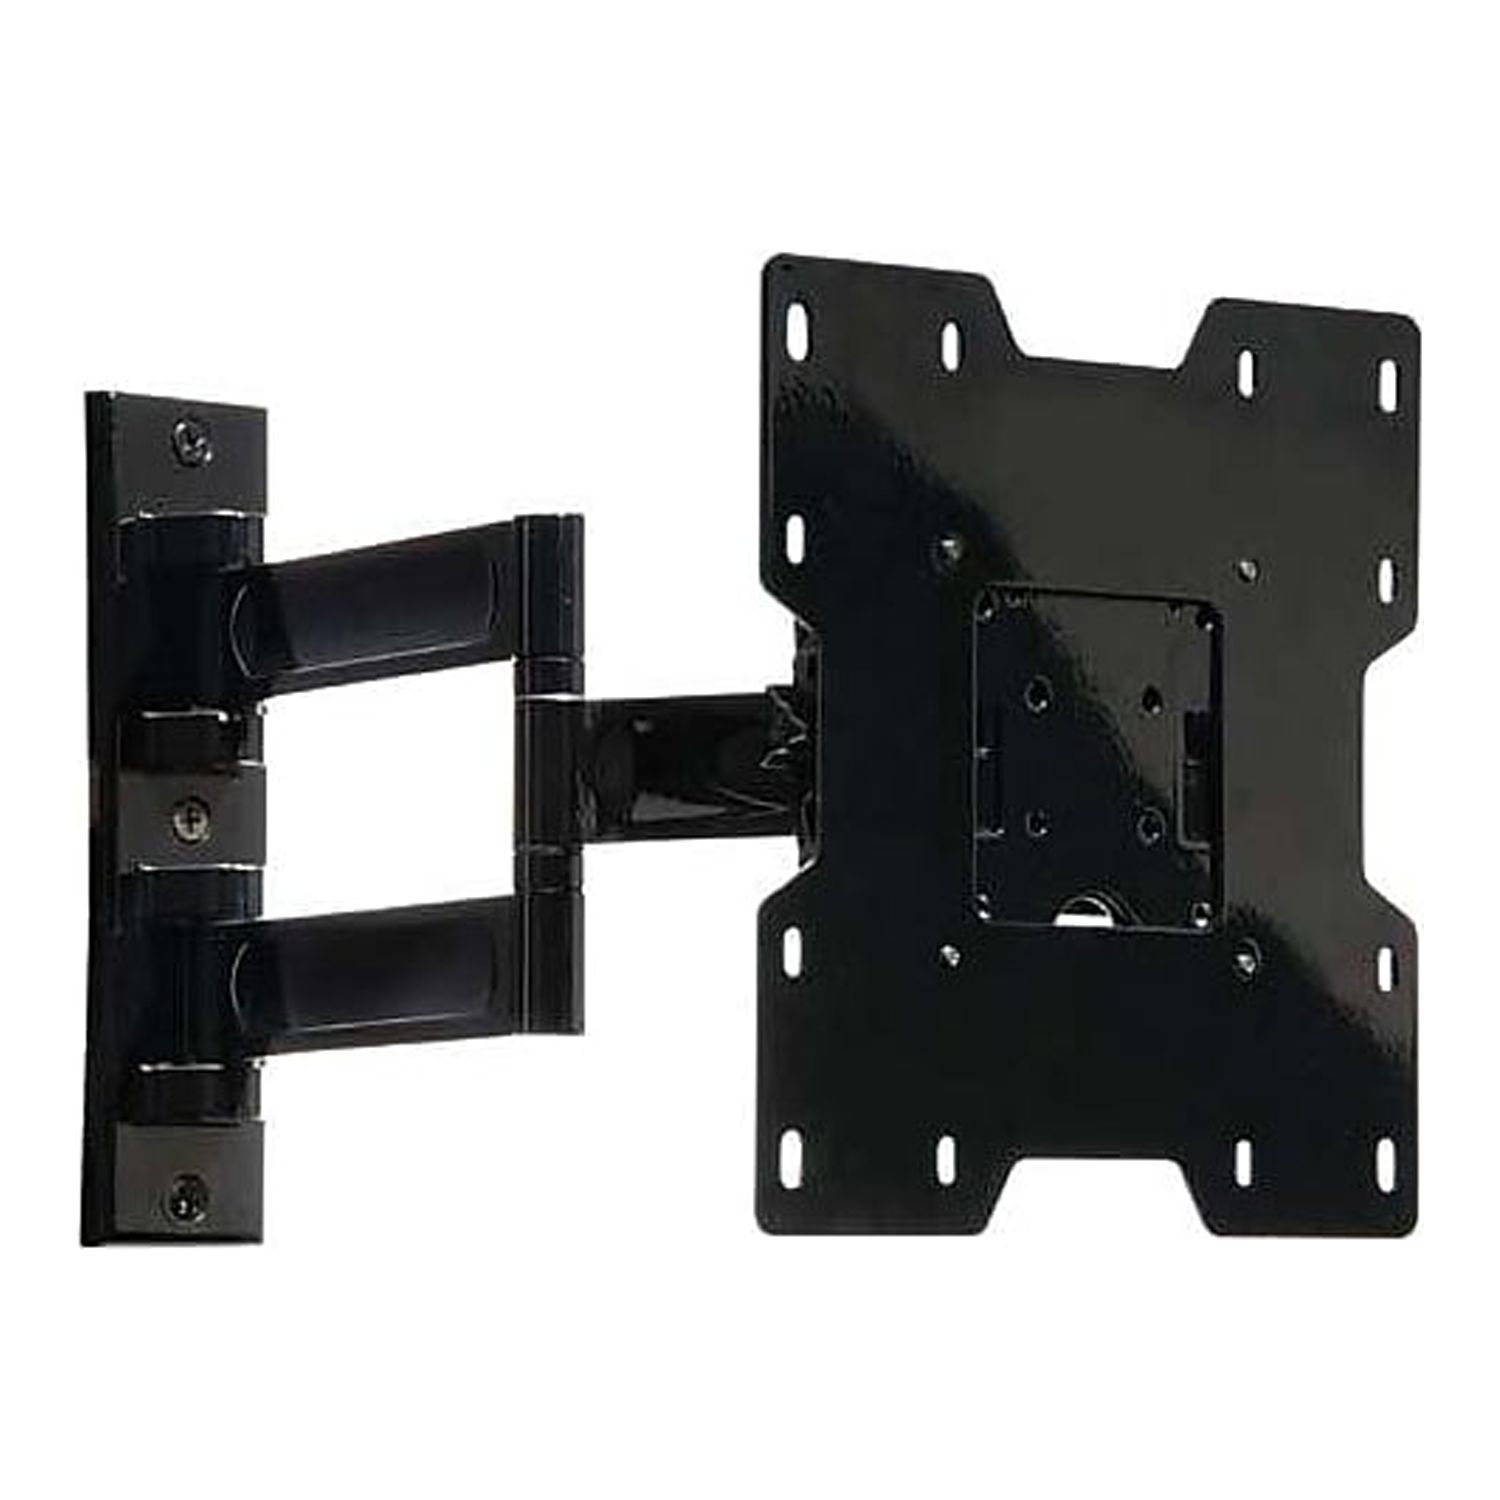 Peerless PA740 22"-40" Articulating TV Wall Mount LED & LCD HDTV Up to VESA 200x200mm Max Load 80 lbs., Compatible with Samsung, Vizio, Sony, Panasonic, LG, and Toshiba TV - image 2 of 2